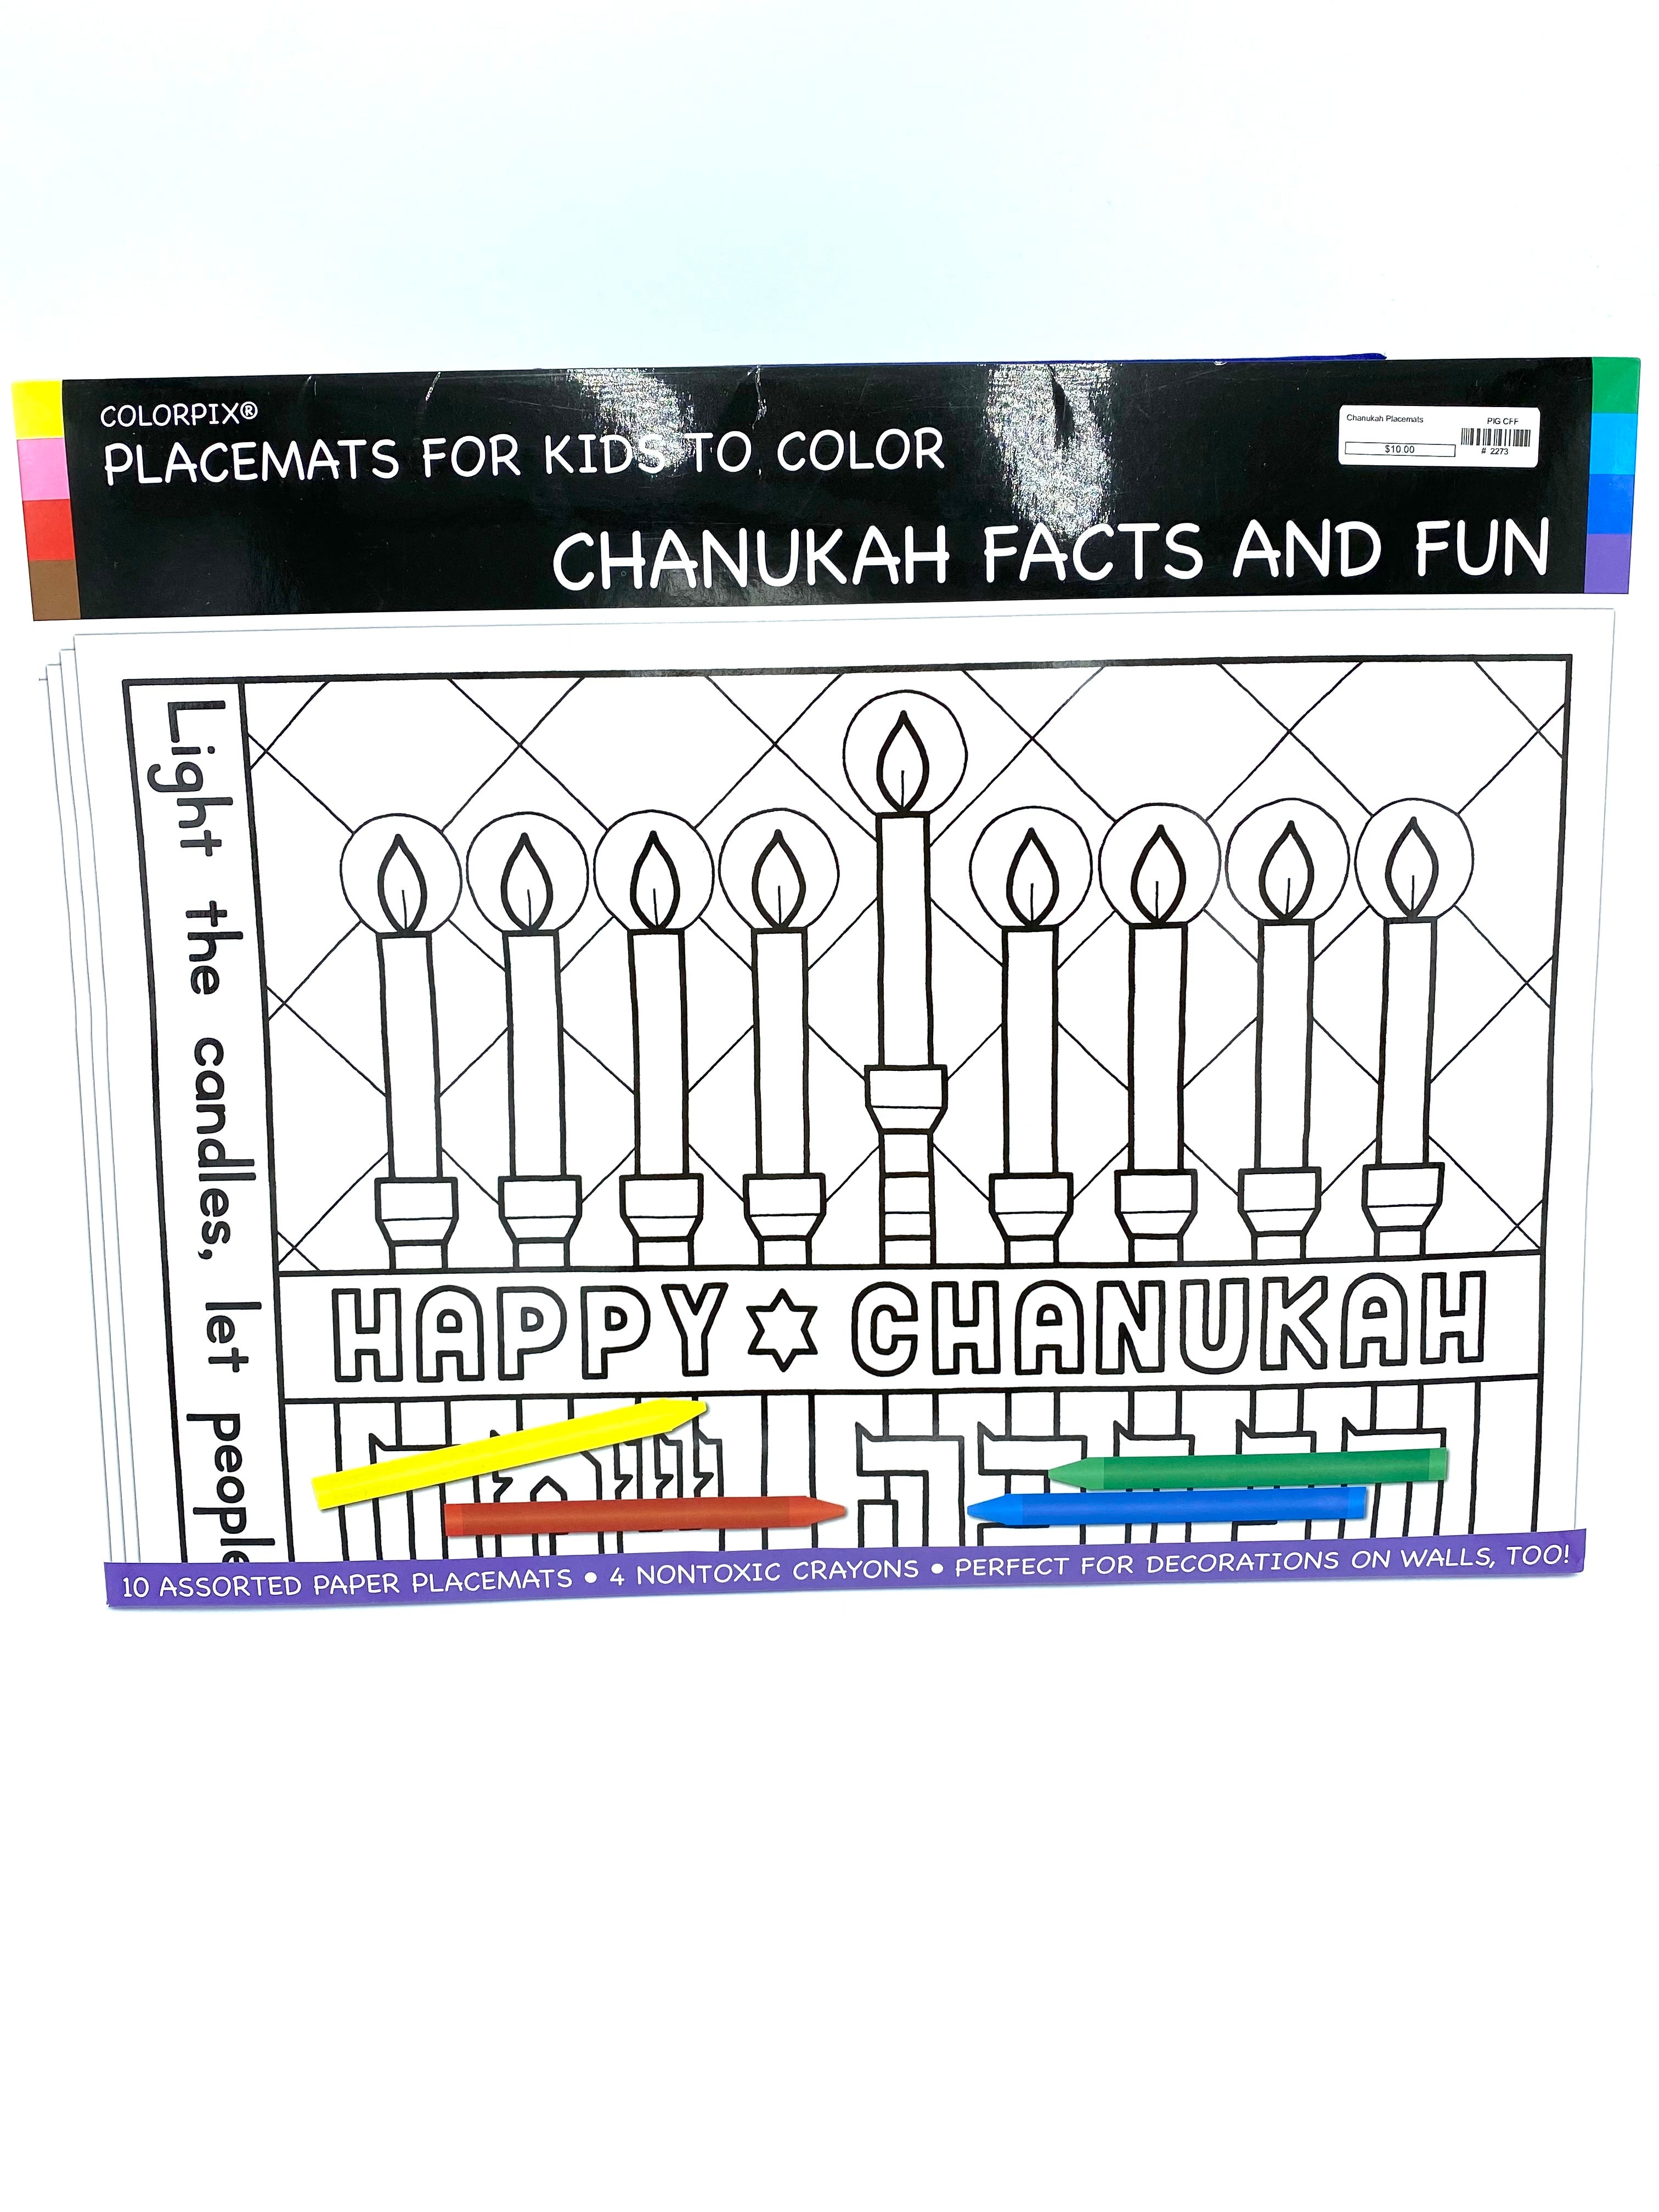 Colorpix Placemats-Chanukah Facts and Fun